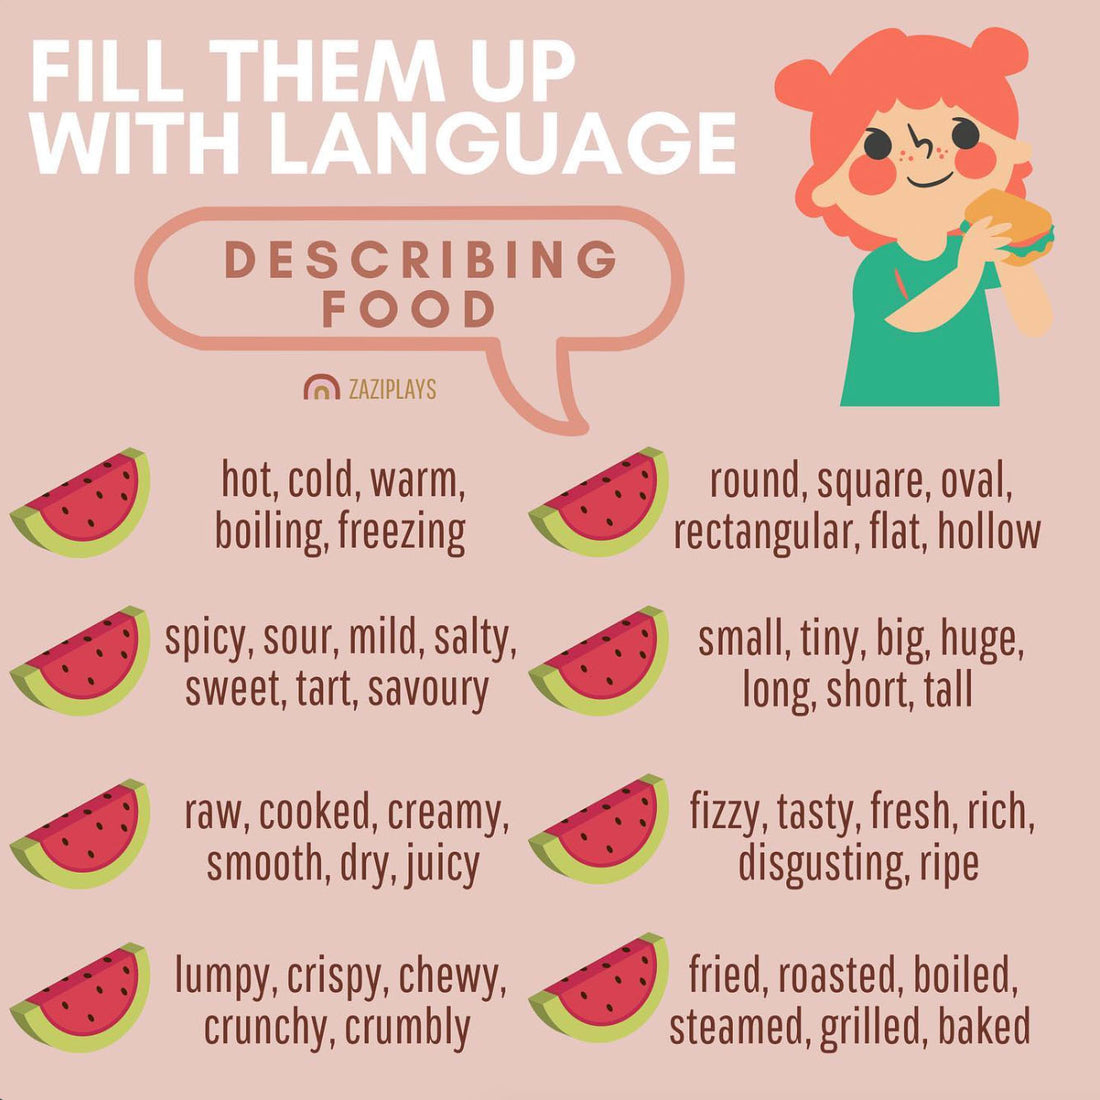 Fill them up with language: Describing Food